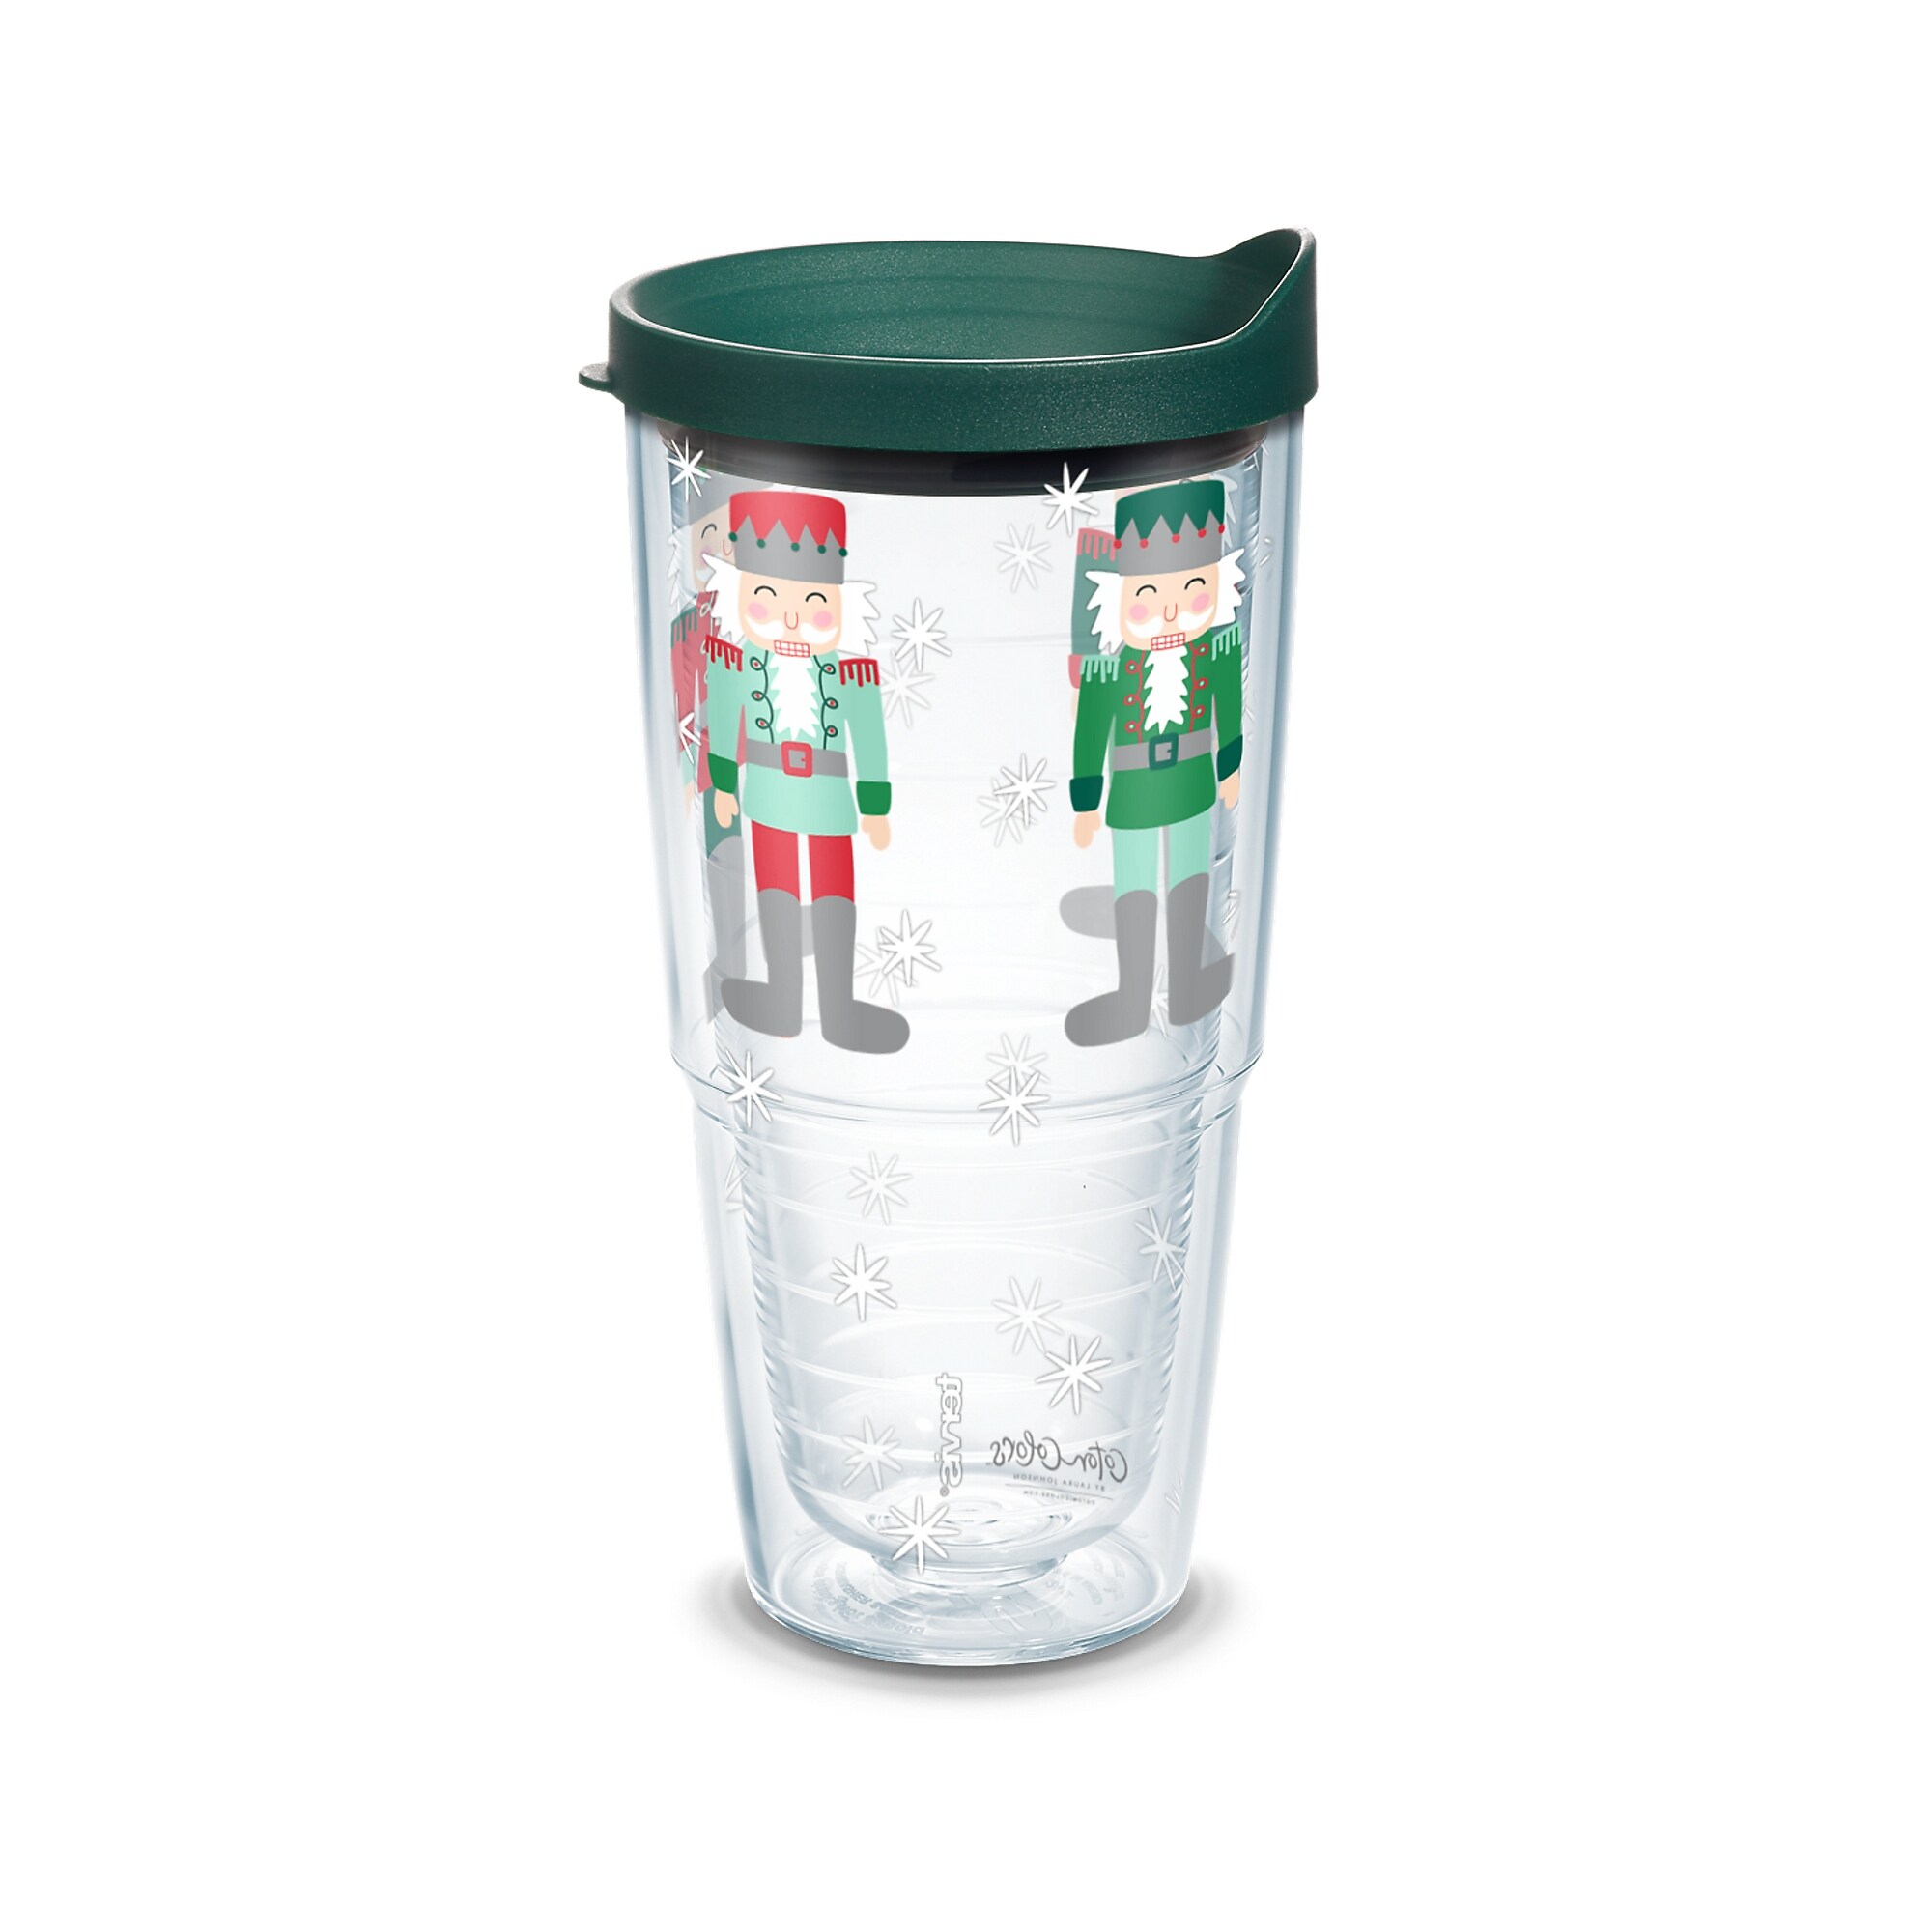 https://ak1.ostkcdn.com/images/products/is/images/direct/e85f3f6c1a42a65d343b6013d24ea79039ff0ed3/Coton-Colors-Christmas-Nutcracker-24-oz-Tumbler-with-lid.jpg